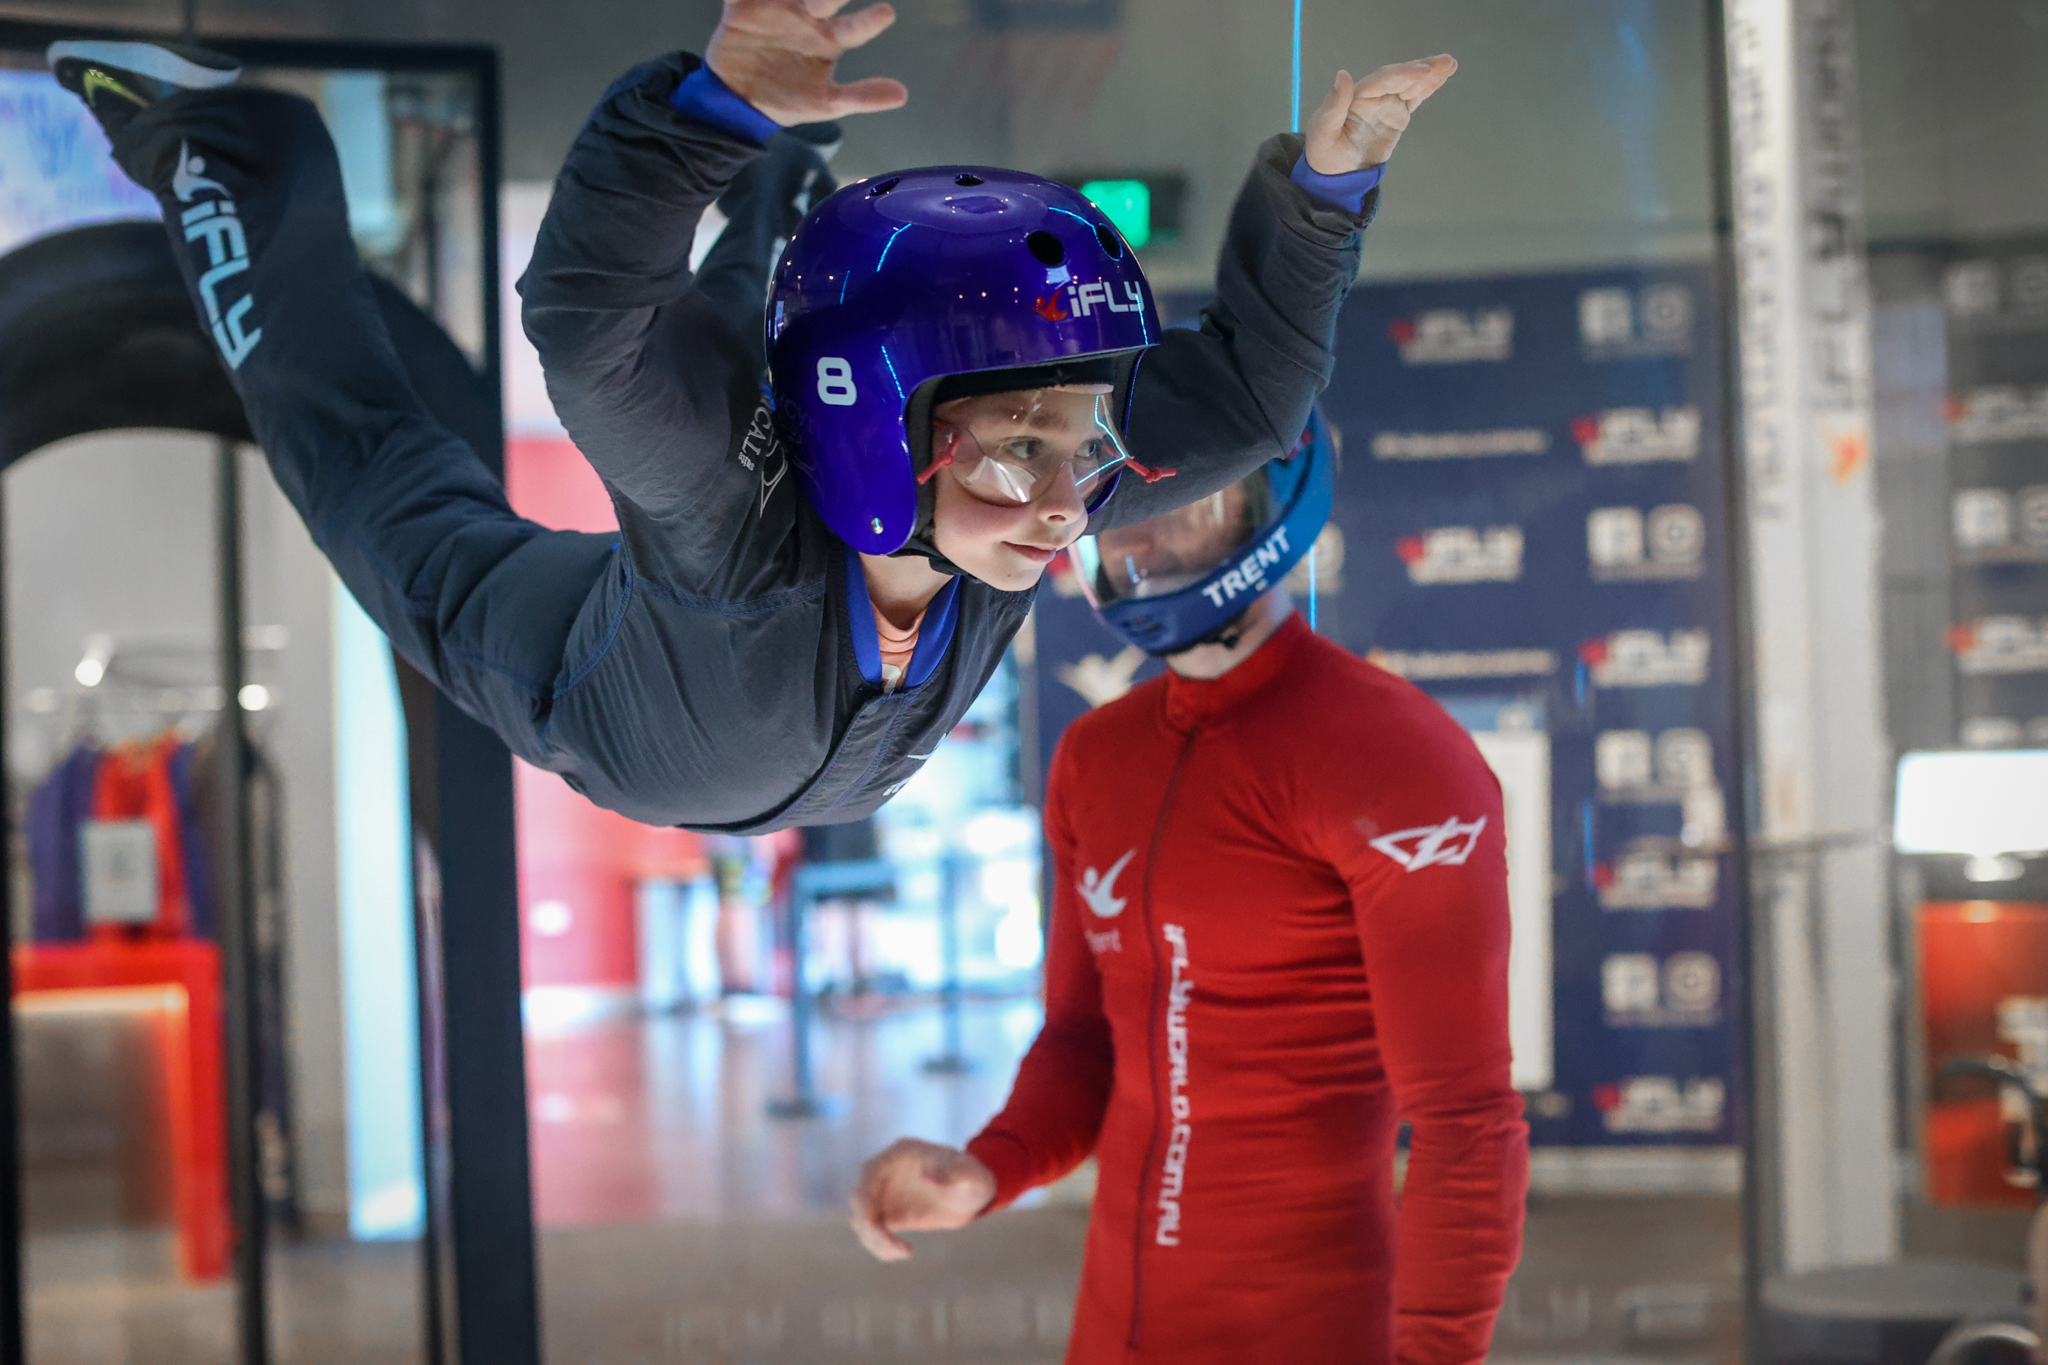 Family Pack – 10 x Indoor Skydiving Flights (Weekday) for up to 5 people